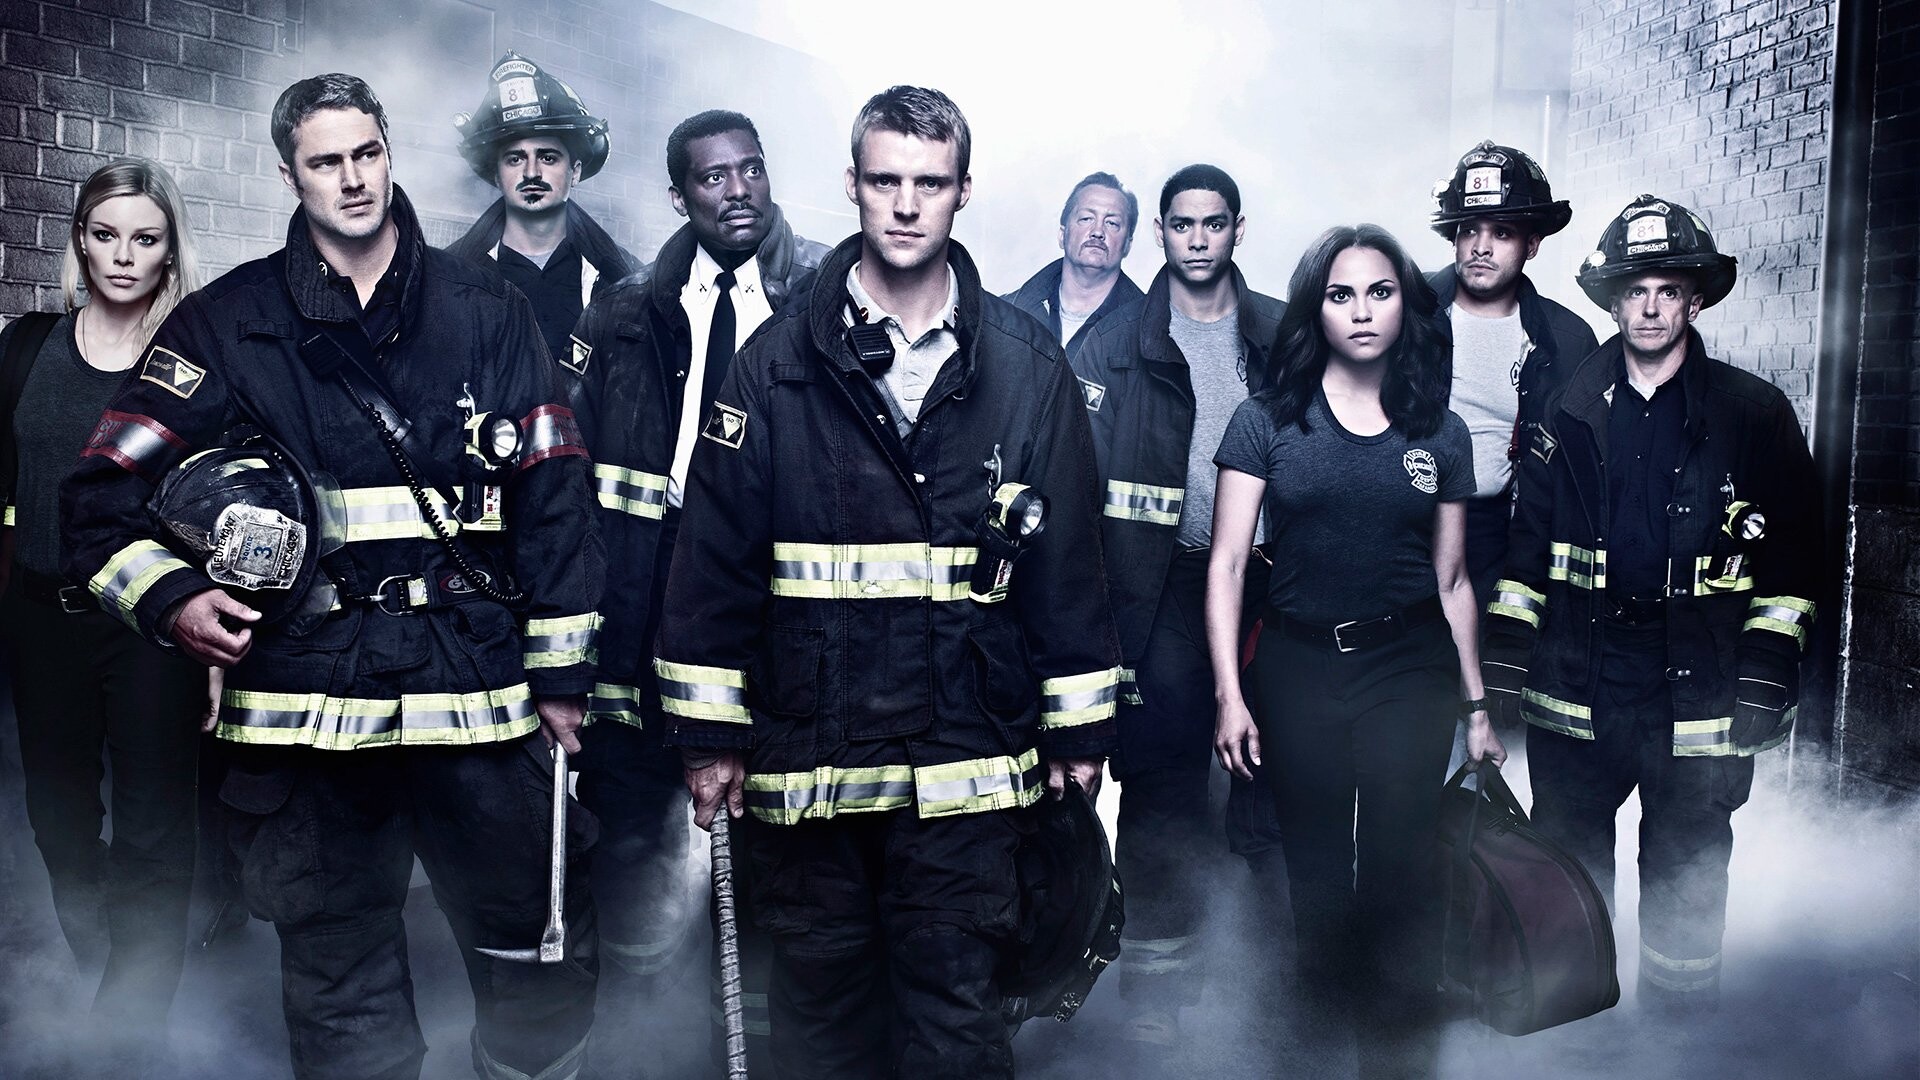 Chicago Fire (TV Series): The firefighters and paramedics, Firehouse 51, Protecting the city, Drama, Action, Adventure. 1920x1080 Full HD Wallpaper.